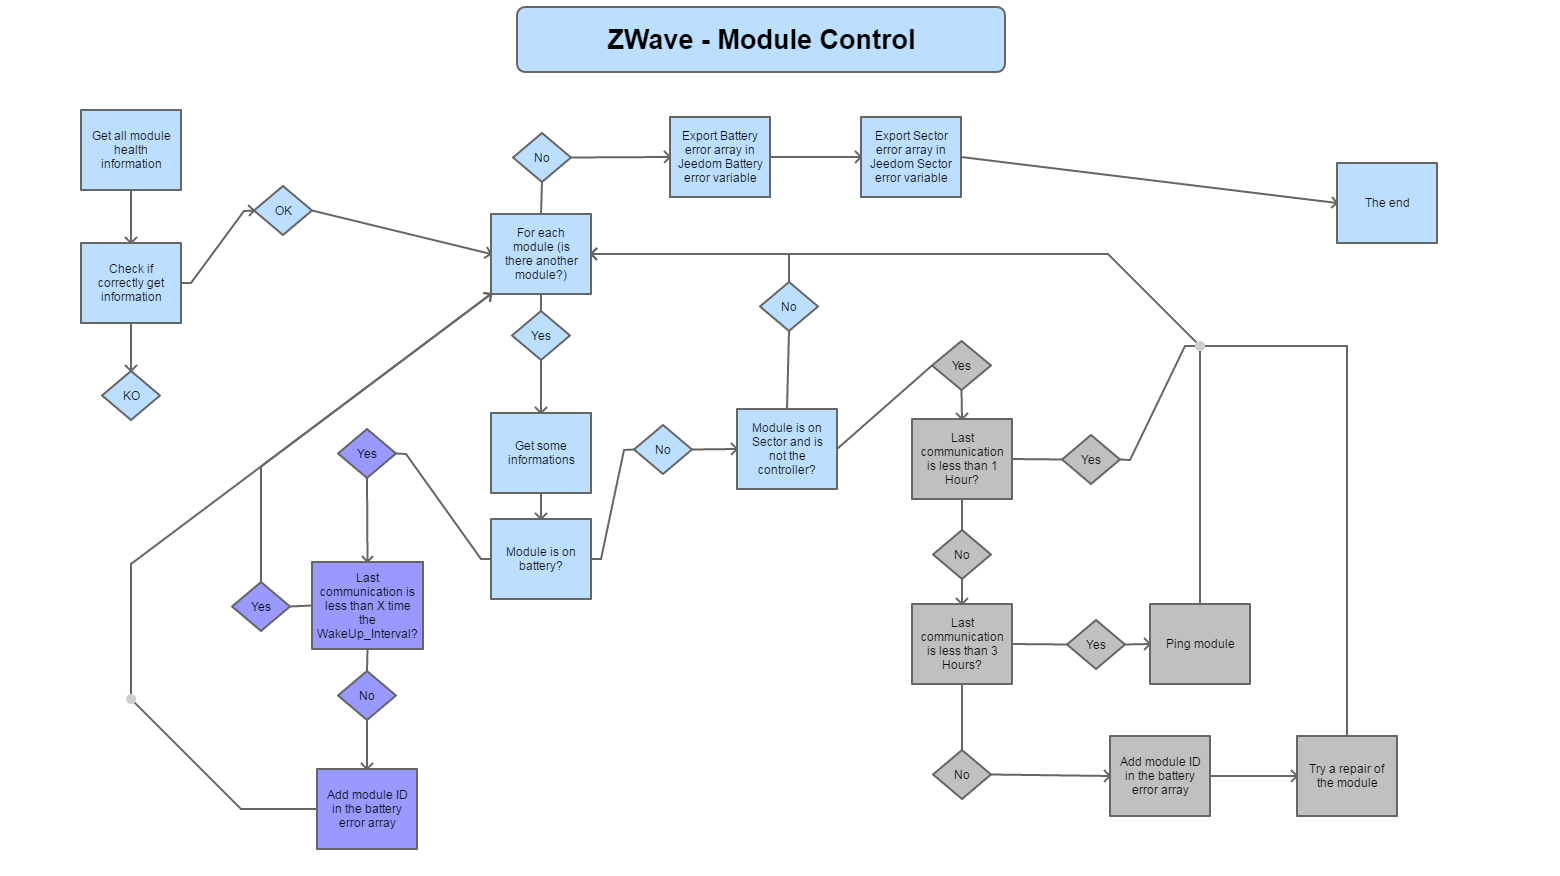 Control_ZWave_Modules.png